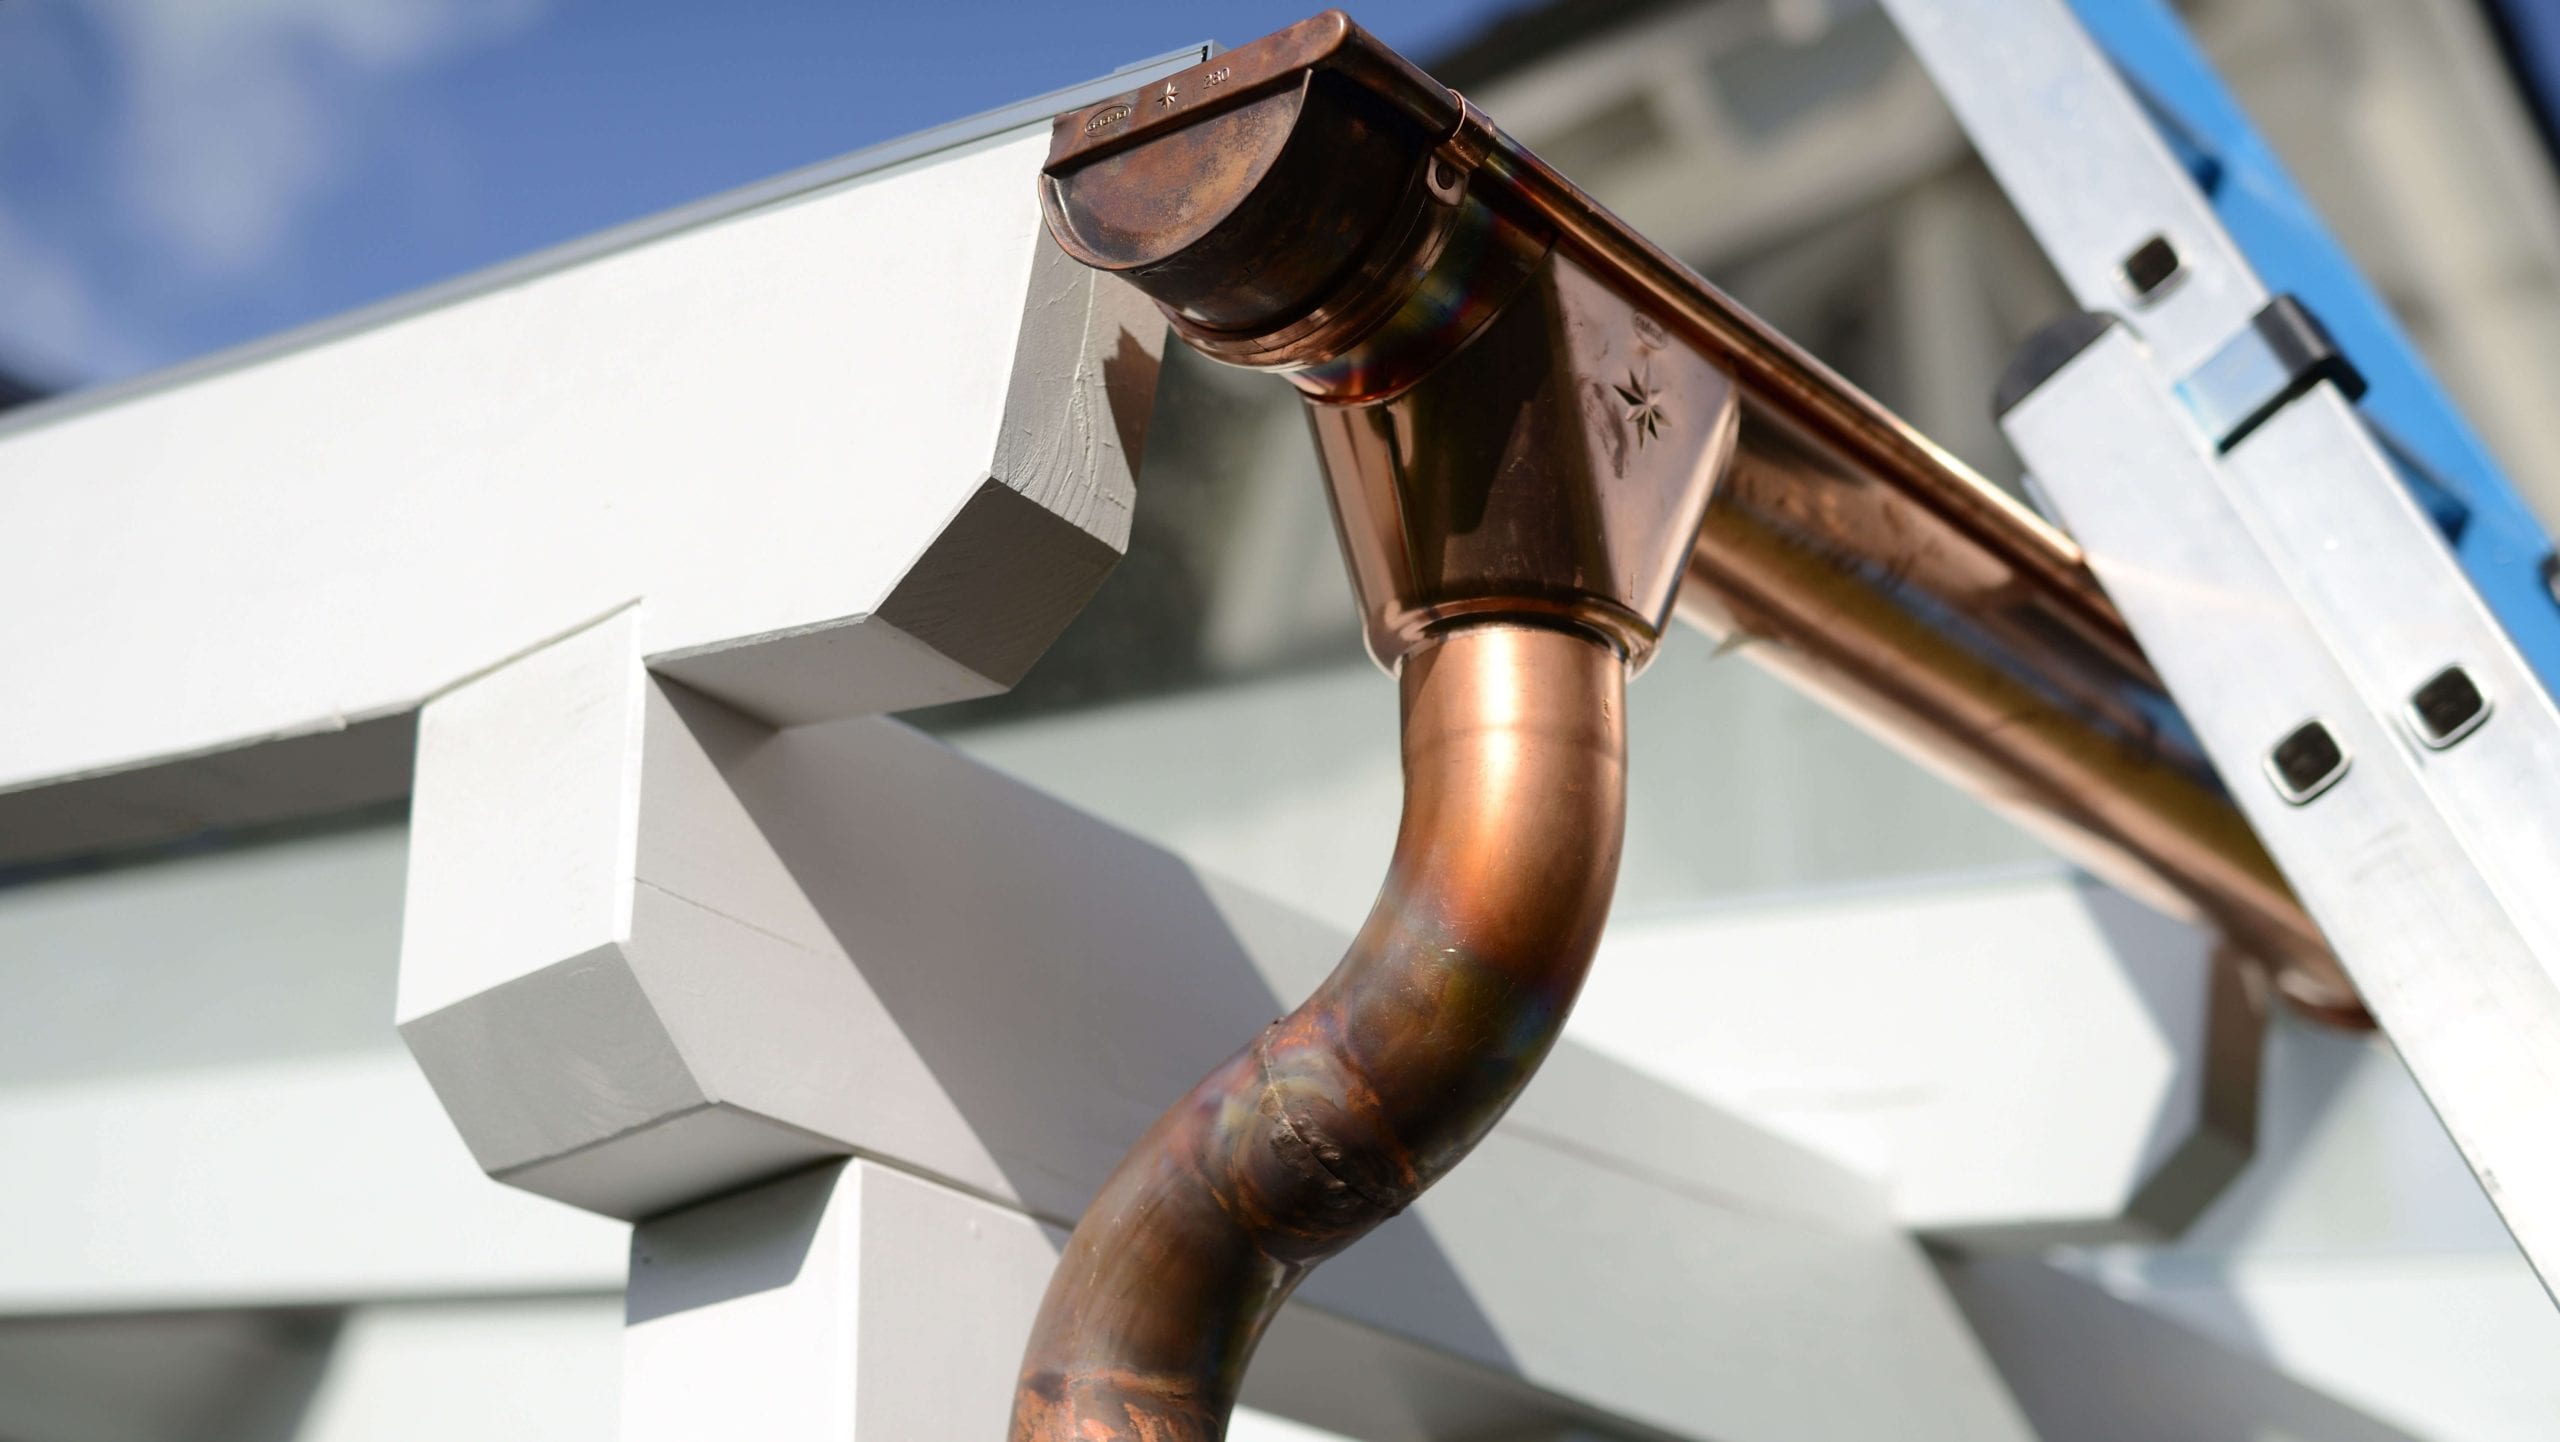 Make your property stand out with copper gutters. Contact for gutter installation in Buffalo